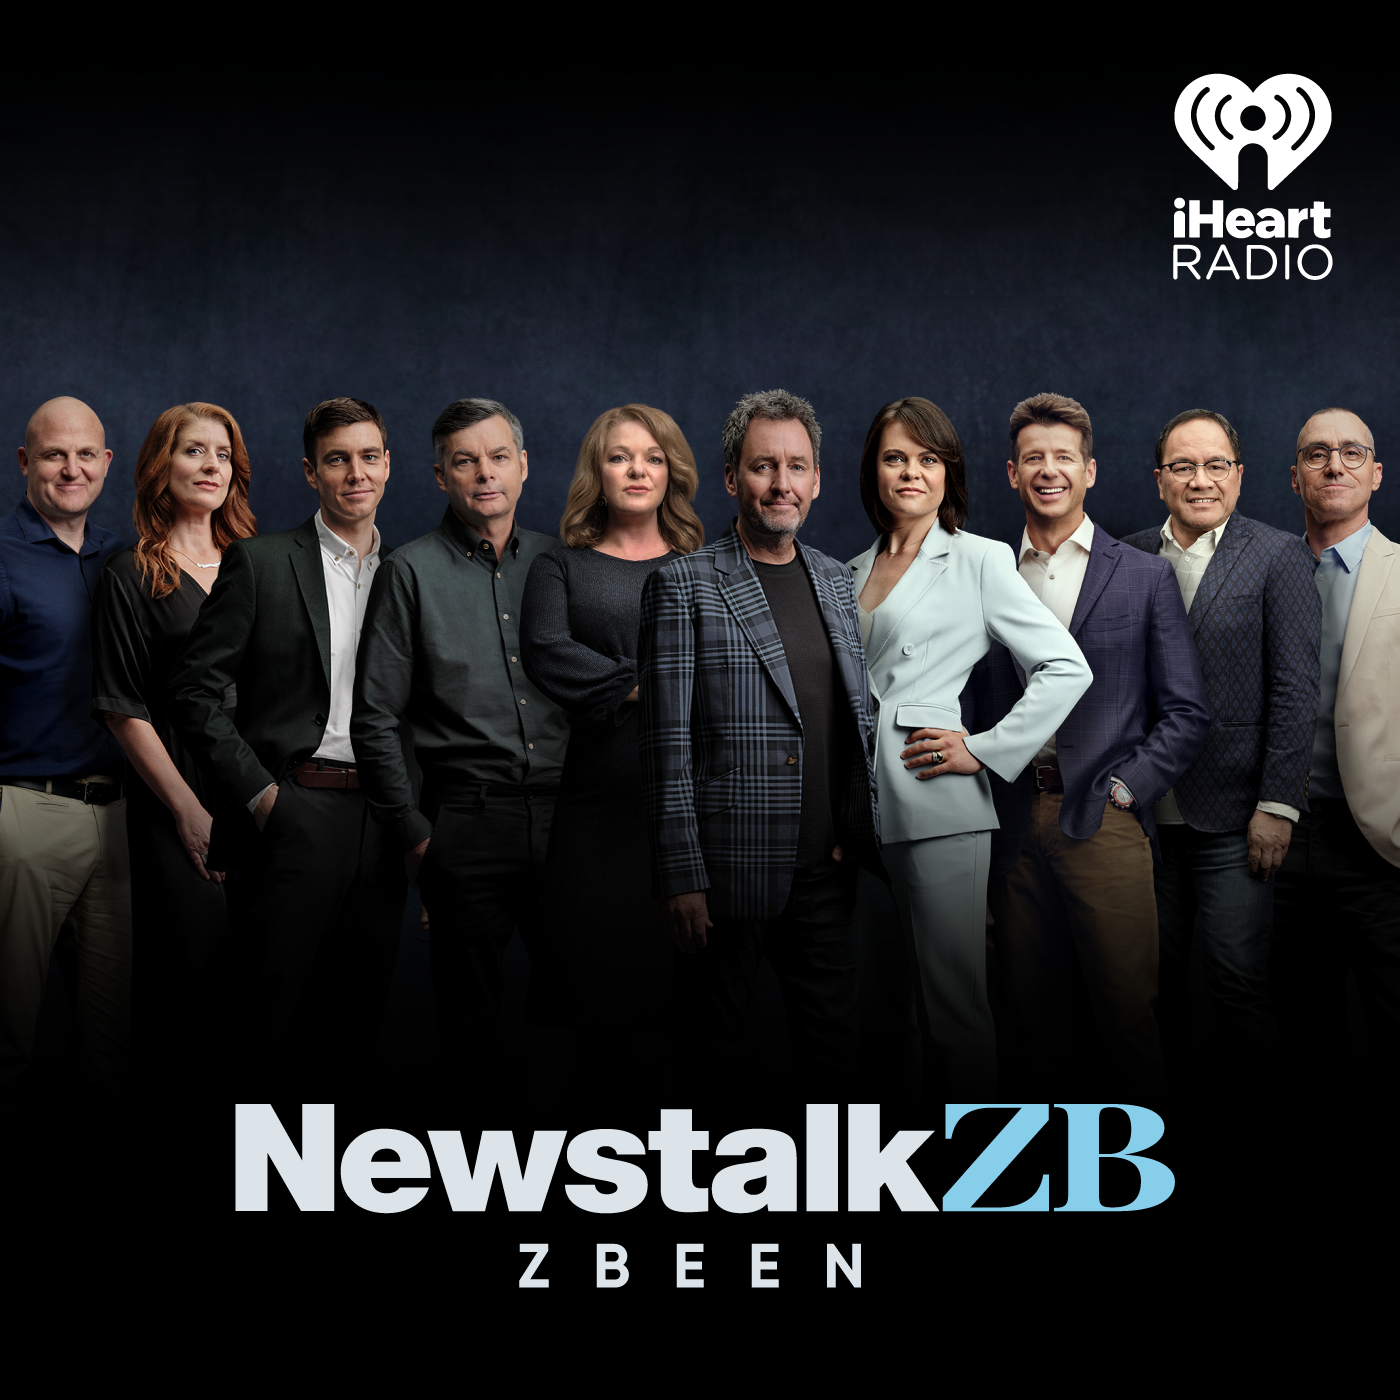 NEWSTALK ZBEEN: Time to Step In